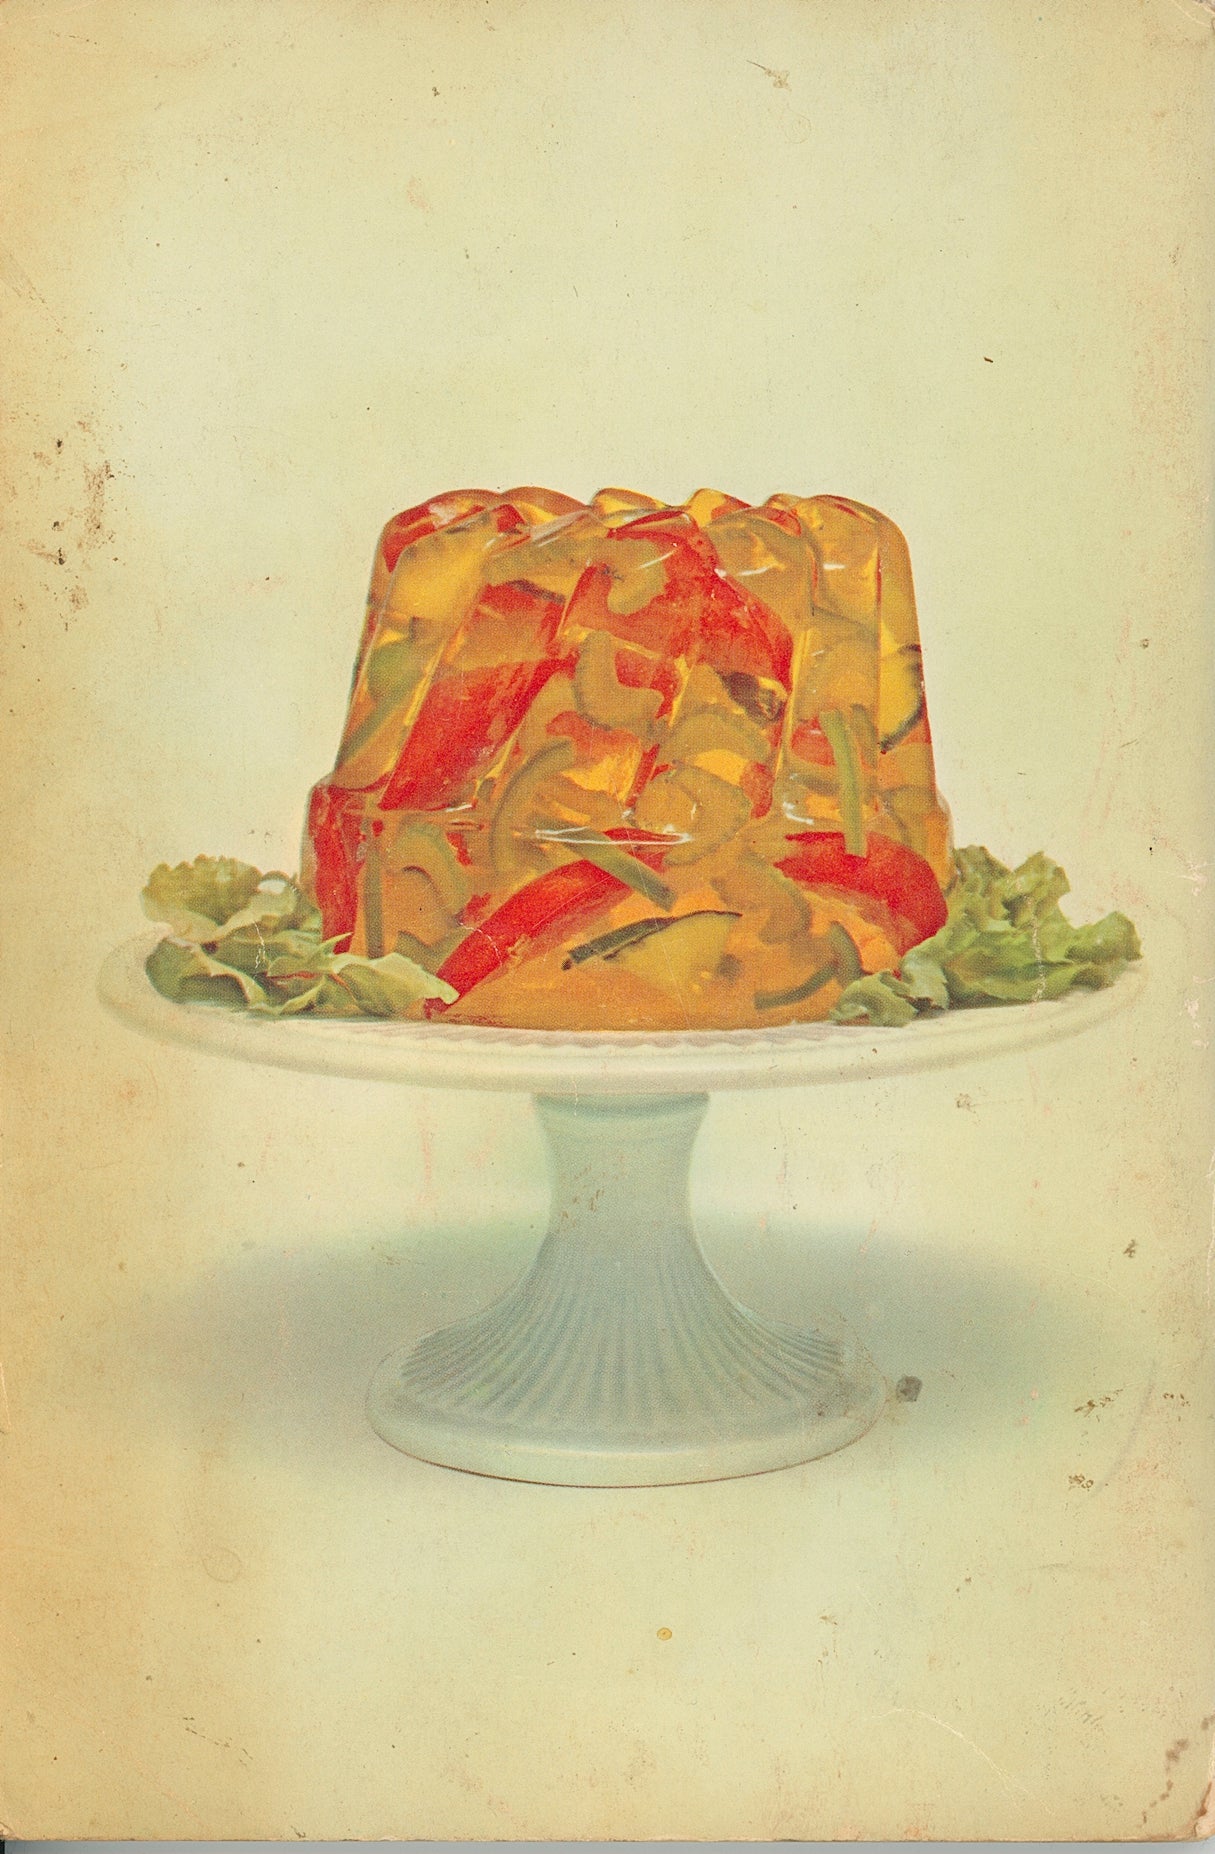 JOYS OF JELL-O Vintage Recipe Booklet Produced by General Foods Circa 1961